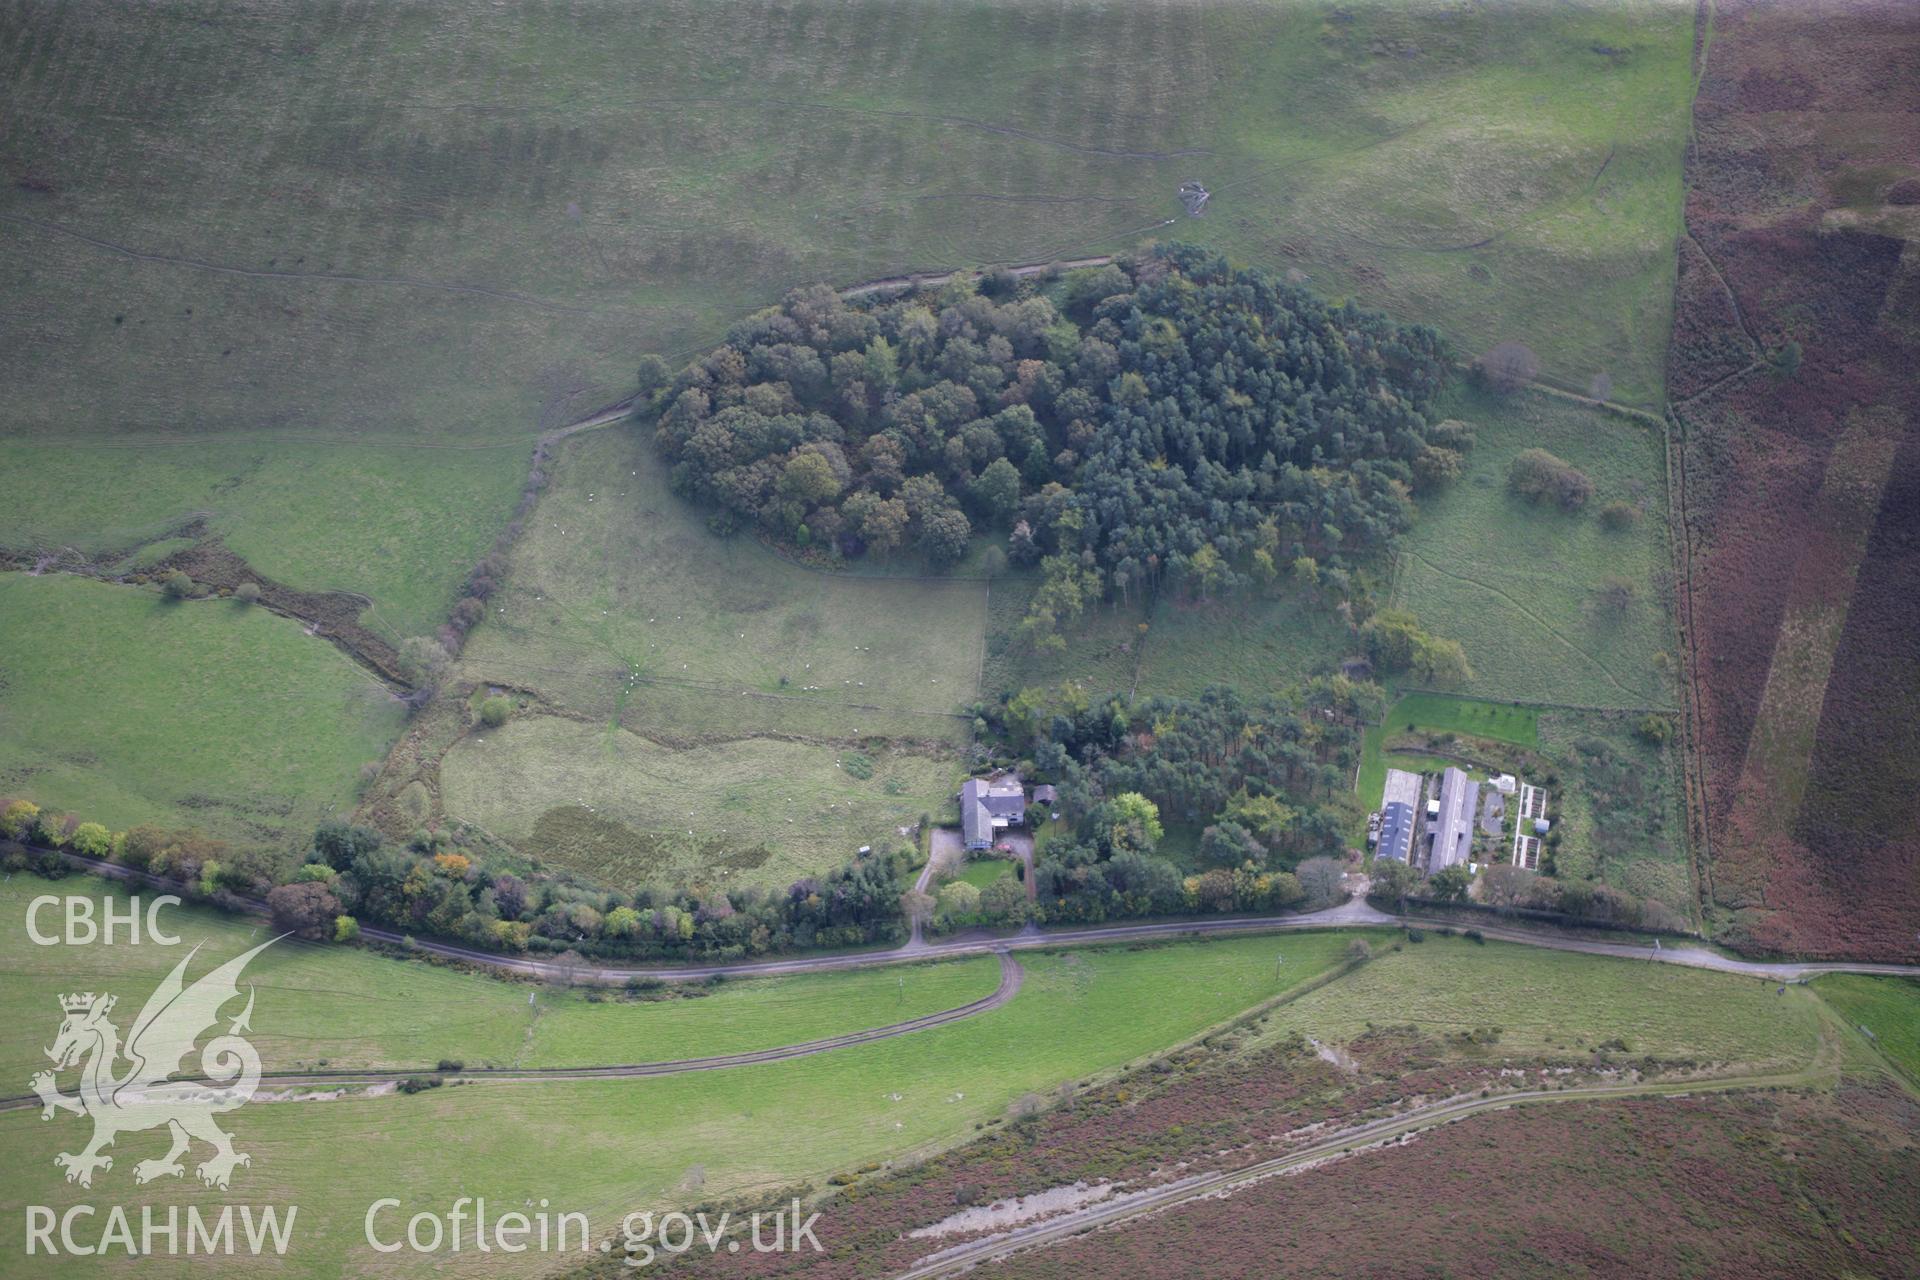 RCAHMW colour oblique aerial photograph of Bwlch-y-Parc Mounds I and II, Tyn-y-Mynydd, Moel Llech. Taken on 13 October 2009 by Toby Driver